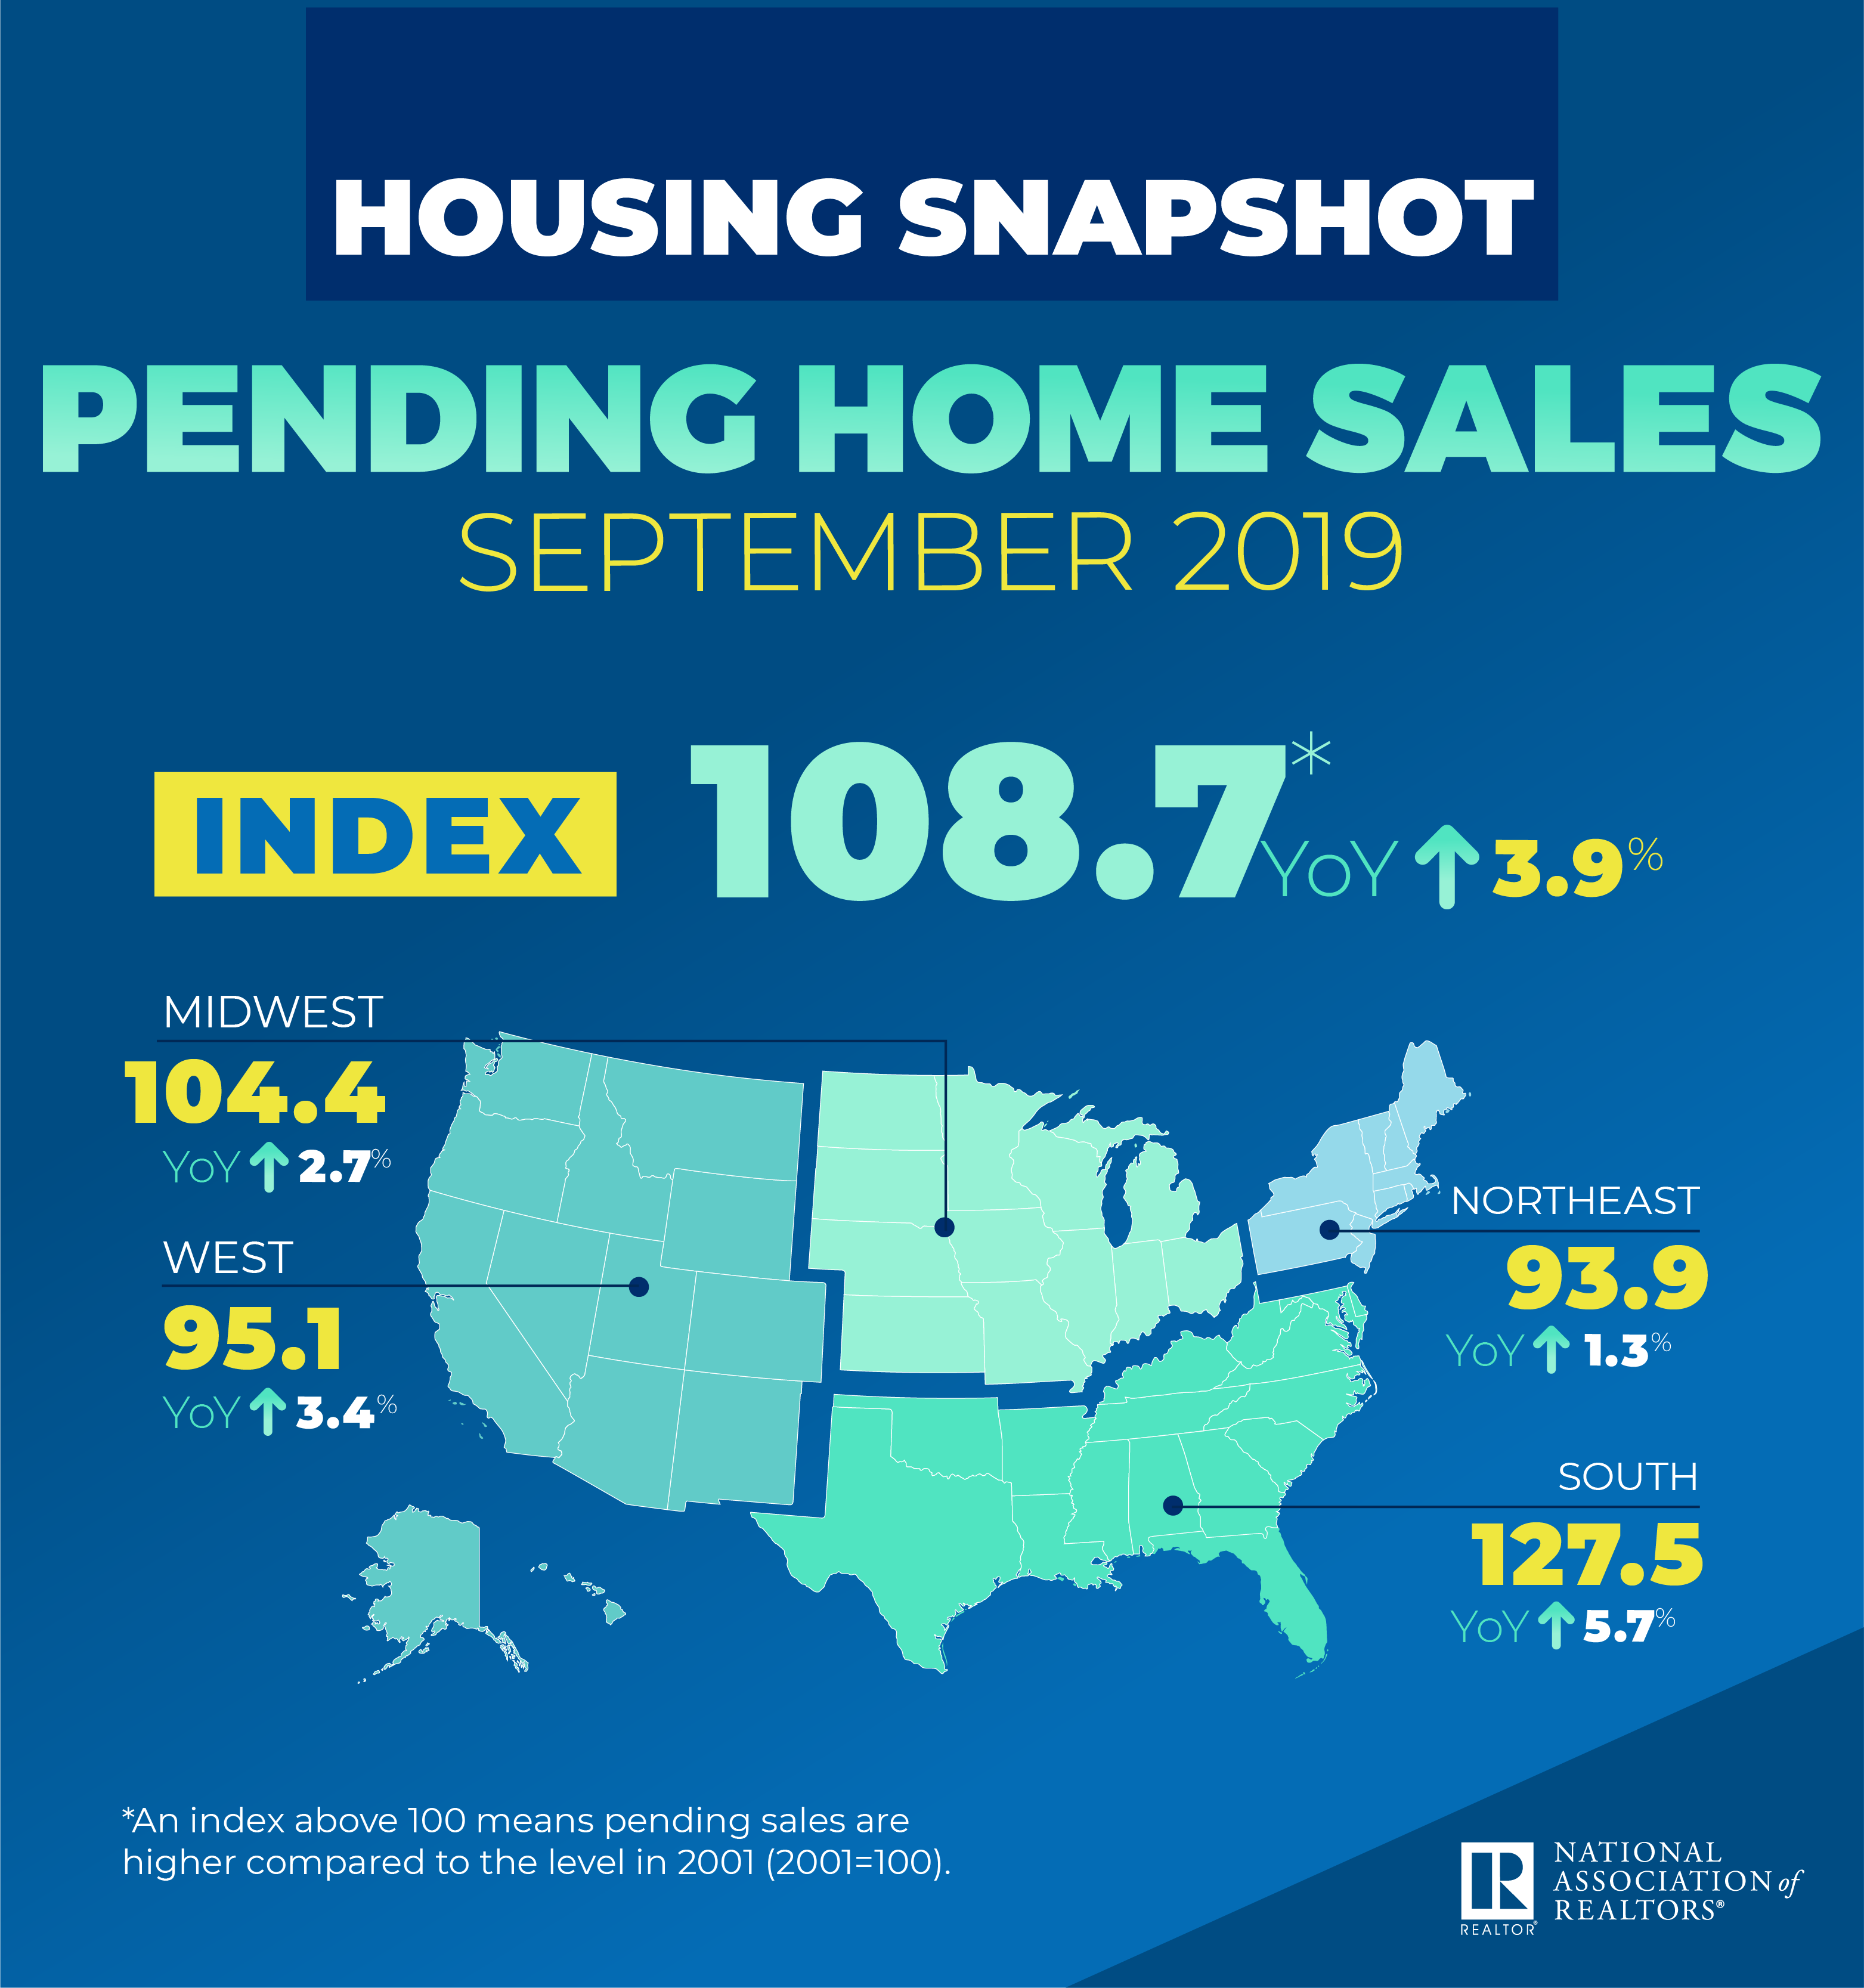 September’s pending home sales data marked a second consecutive month of increases